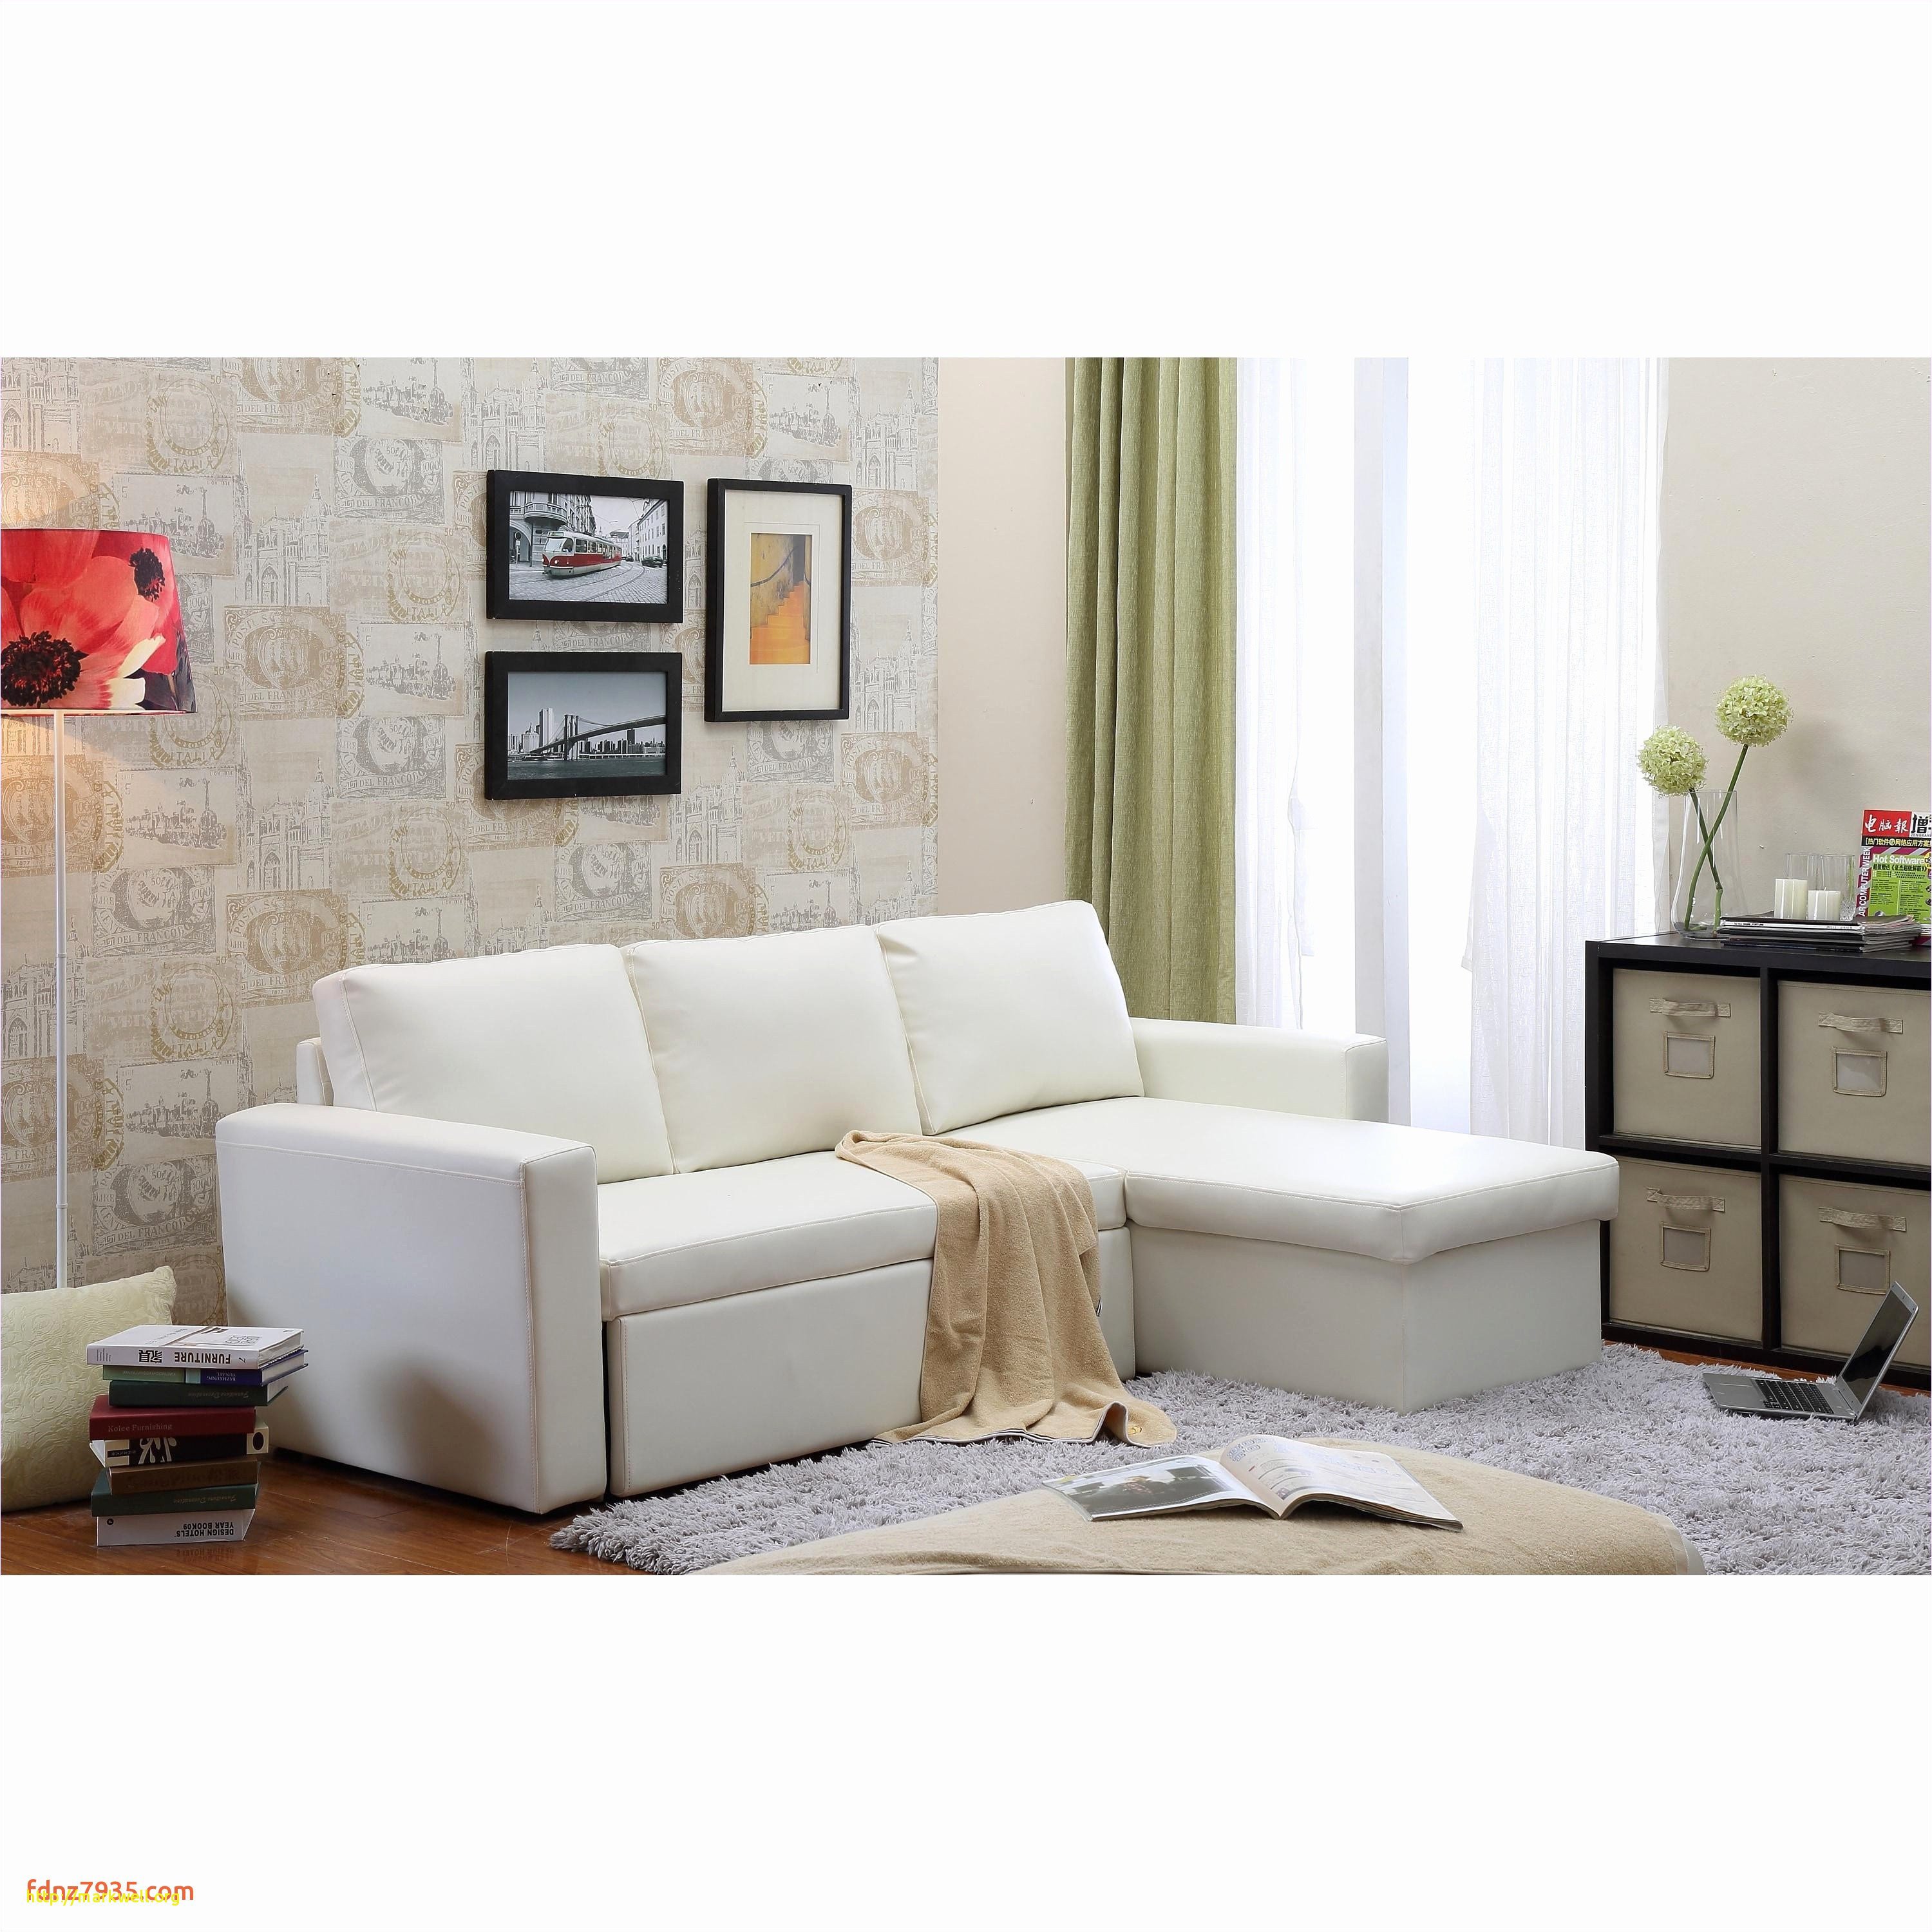 Mini Couch for Bedroom New Awesome Bobs Living Room Furniture